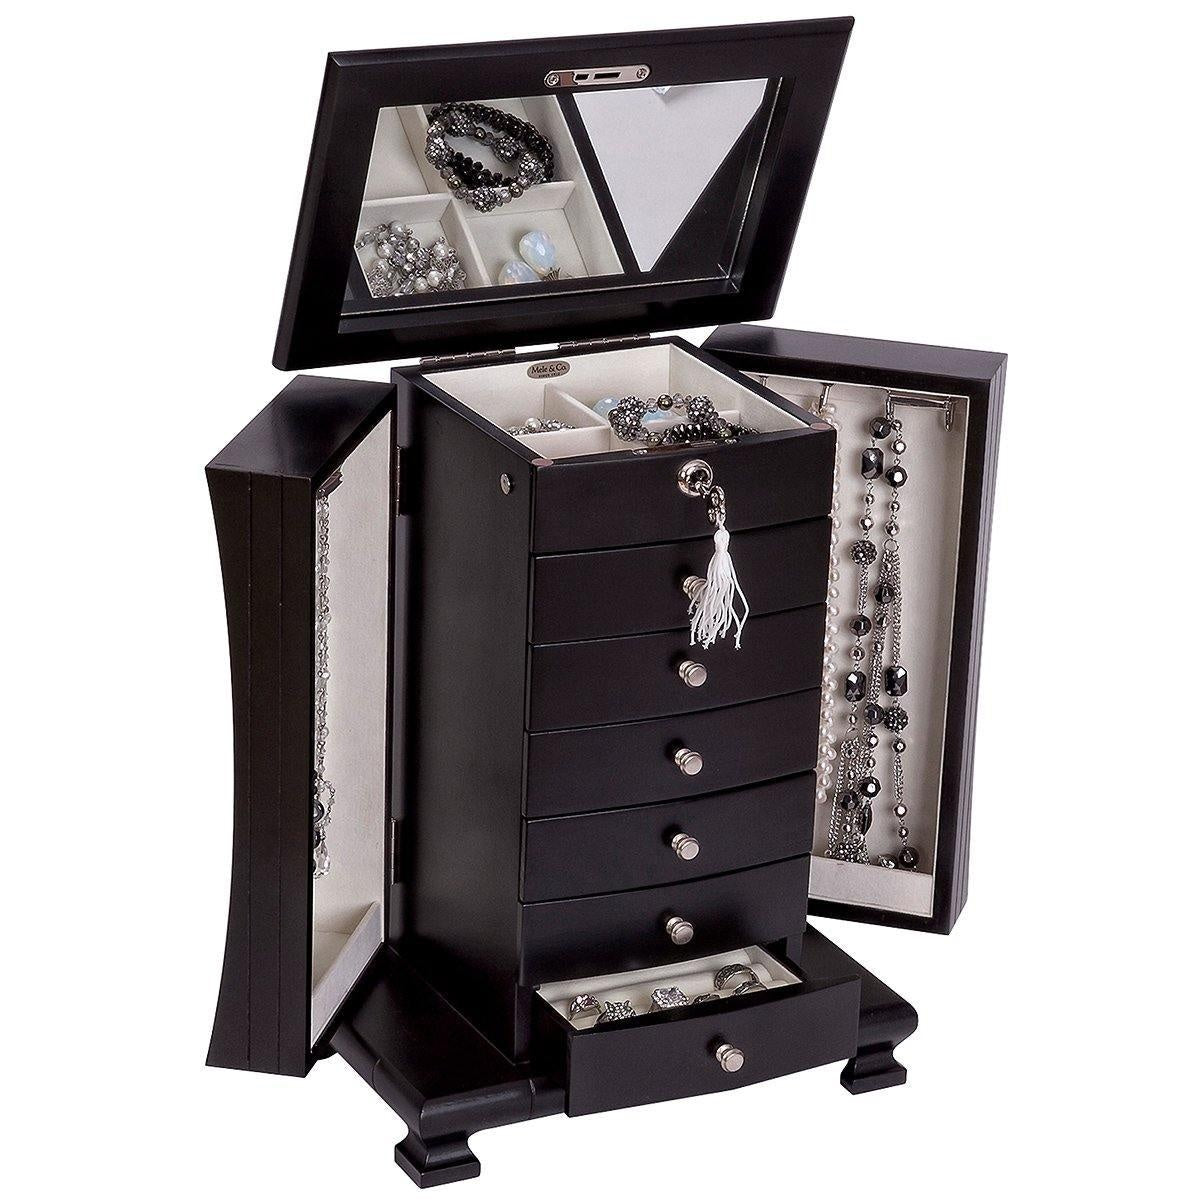 Hour Glass Black Java Finish Wooden Jewellery Box - Layla by Mele & Co